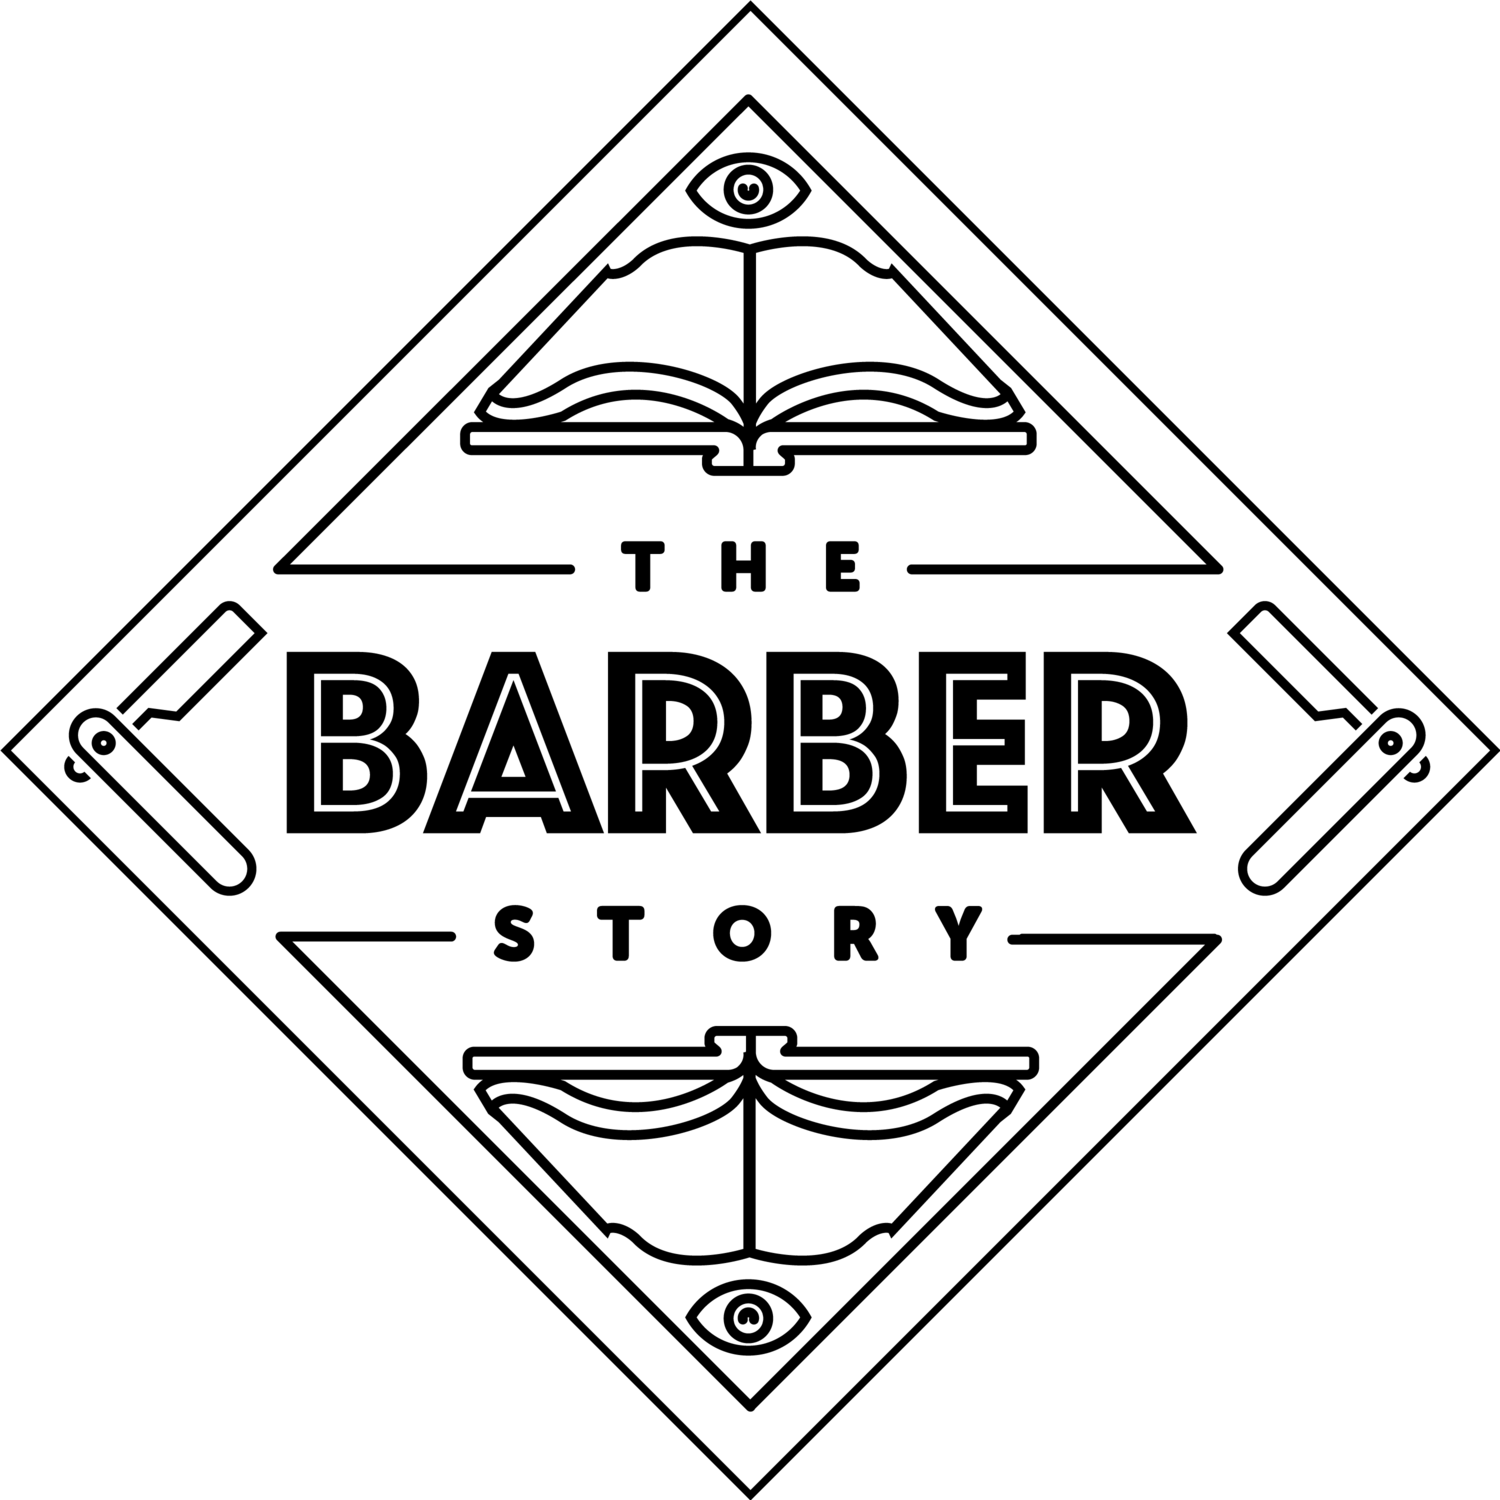 The Barber Story